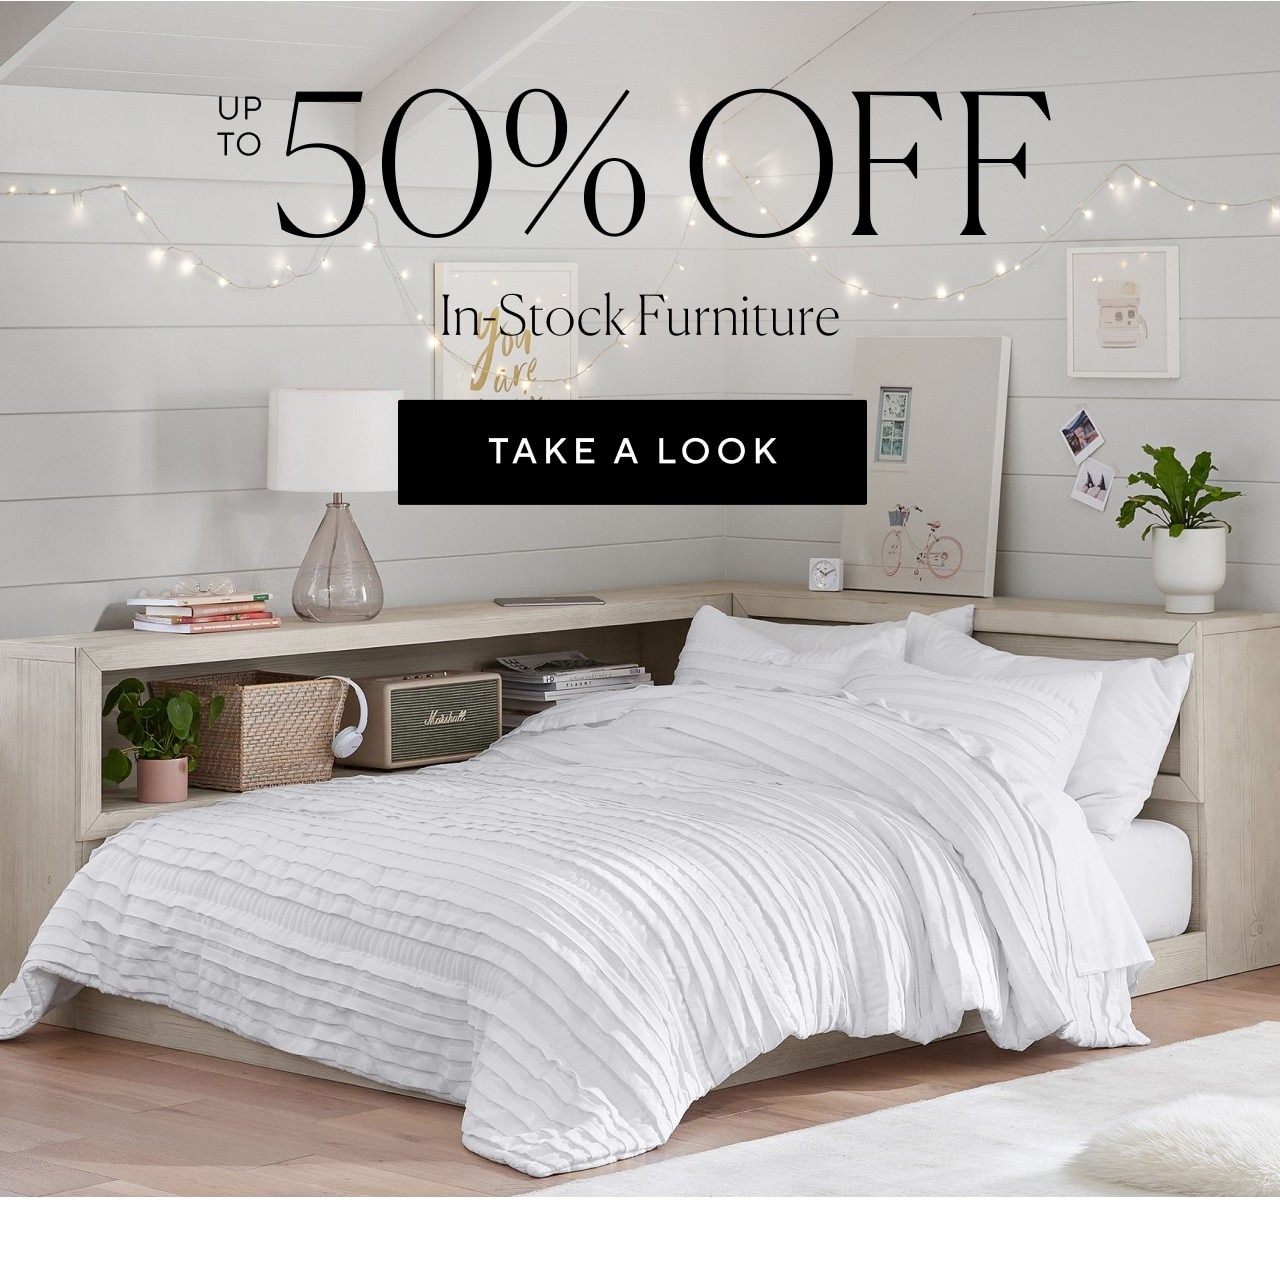 Up to 50% off in-stock furniture. Take a look